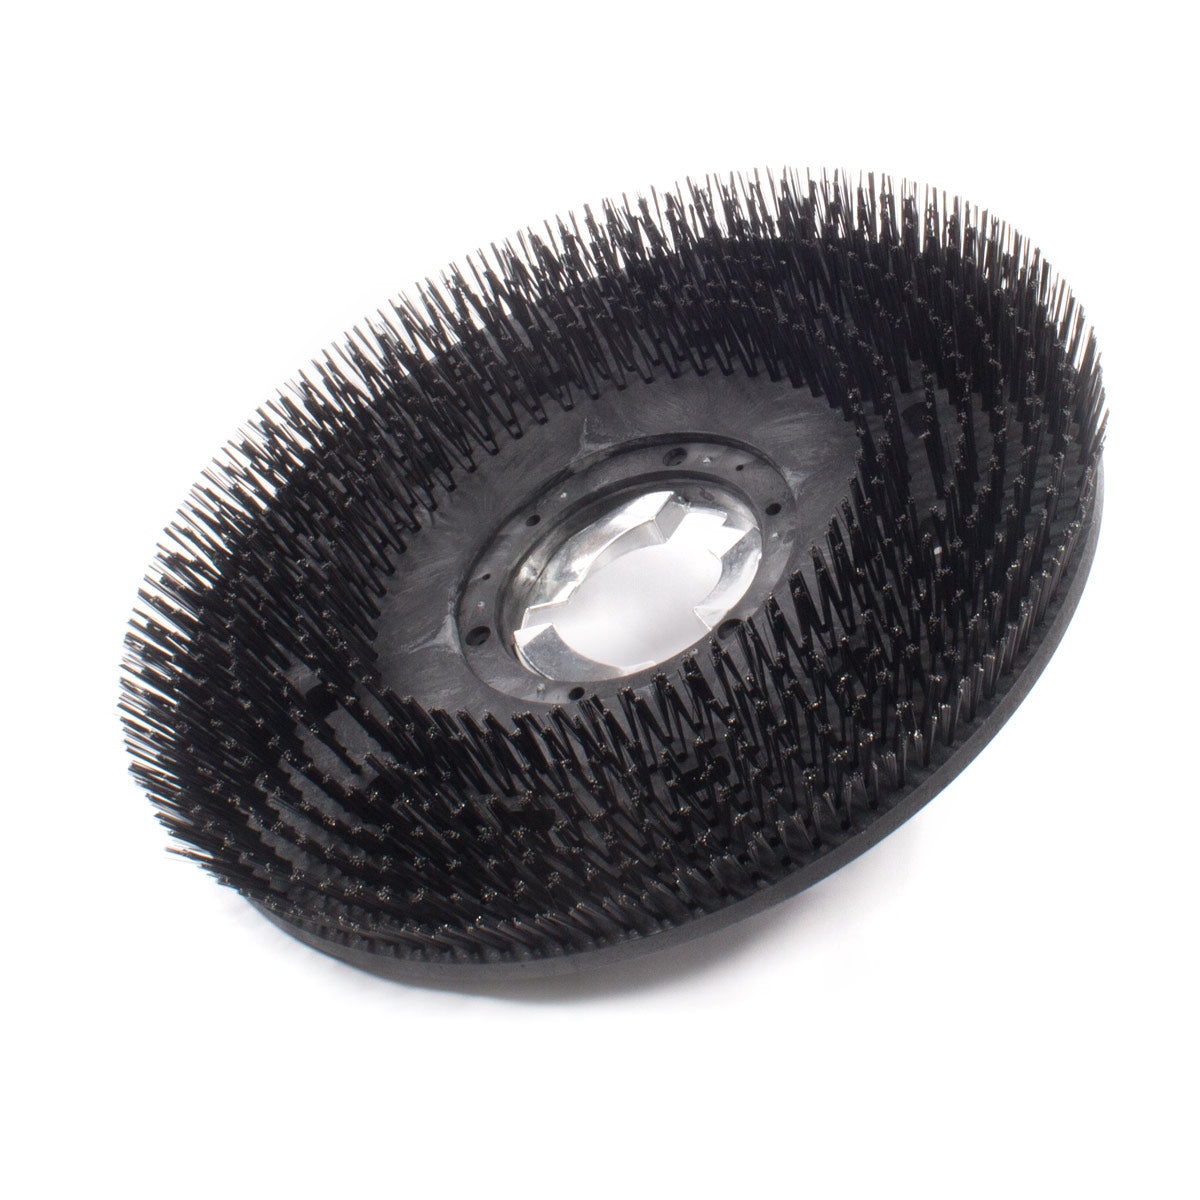 Industrial Scrubbing Brush Serves as the Best Tool for Floor Cleaning